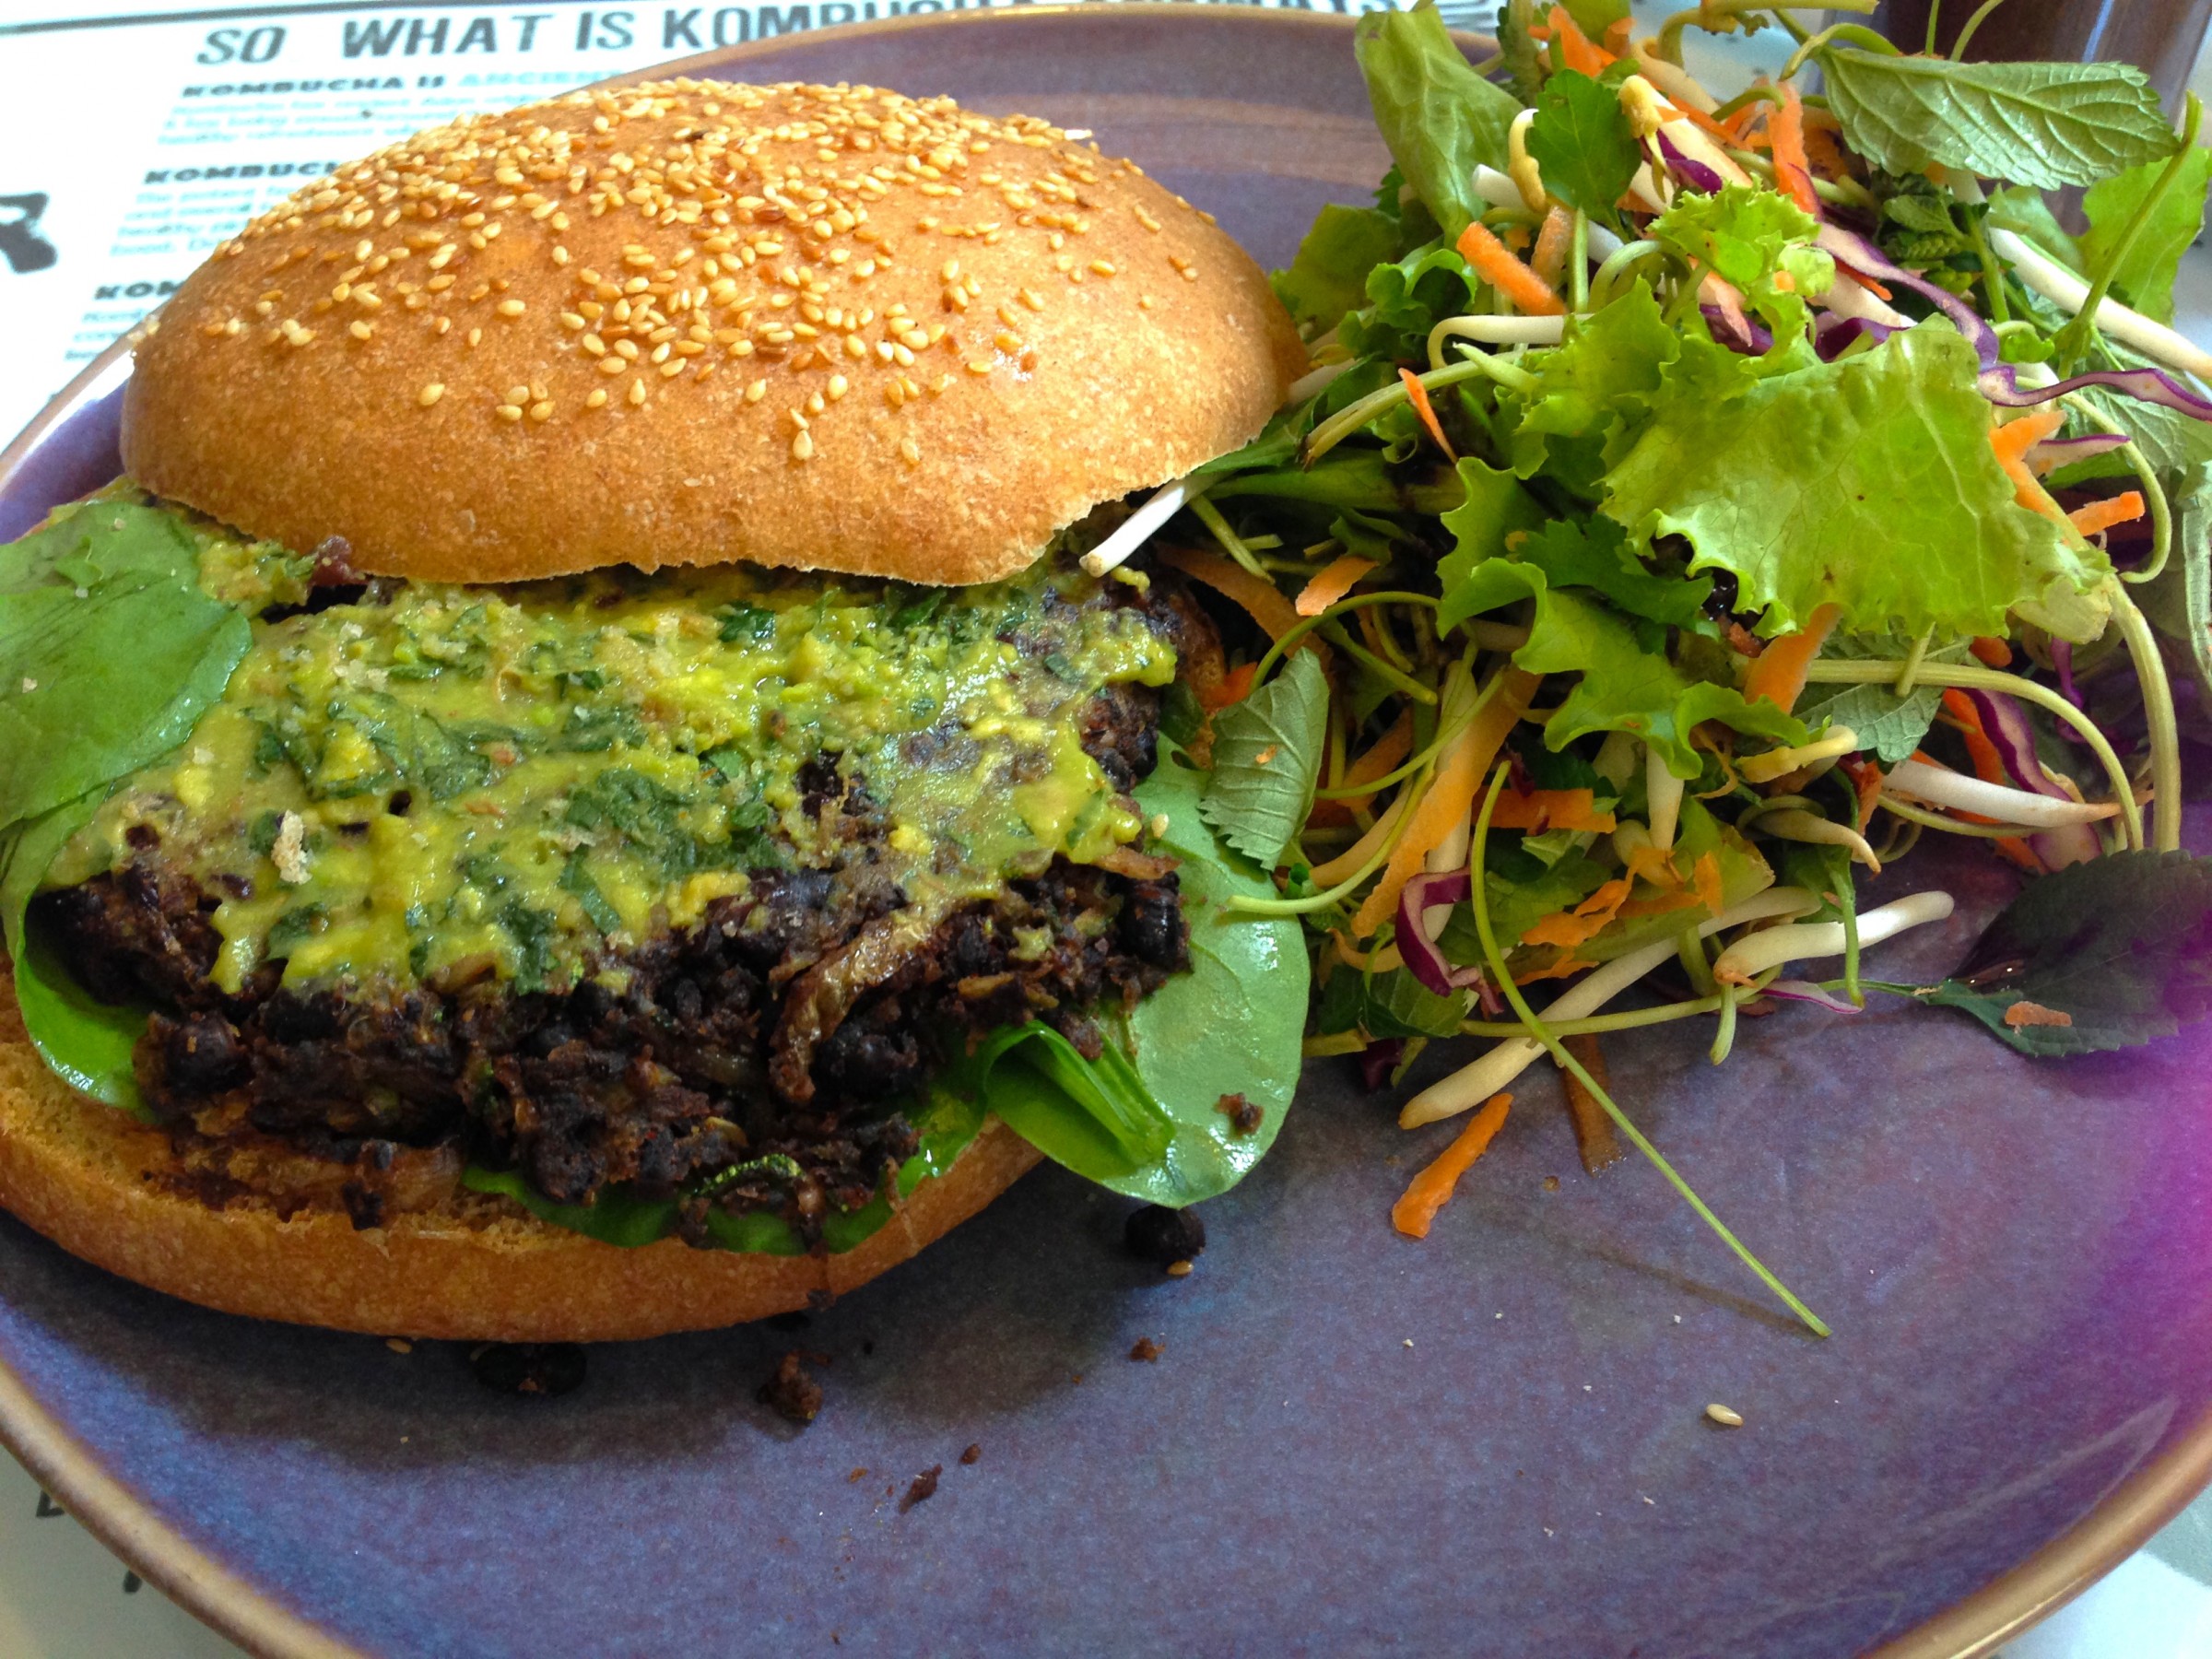 Carmelized Zucchini & Black Bena Burger. Comes with avocado and kinh gioi dressing and fresh spinach leaves on a homemade wholemeal sesame bun.